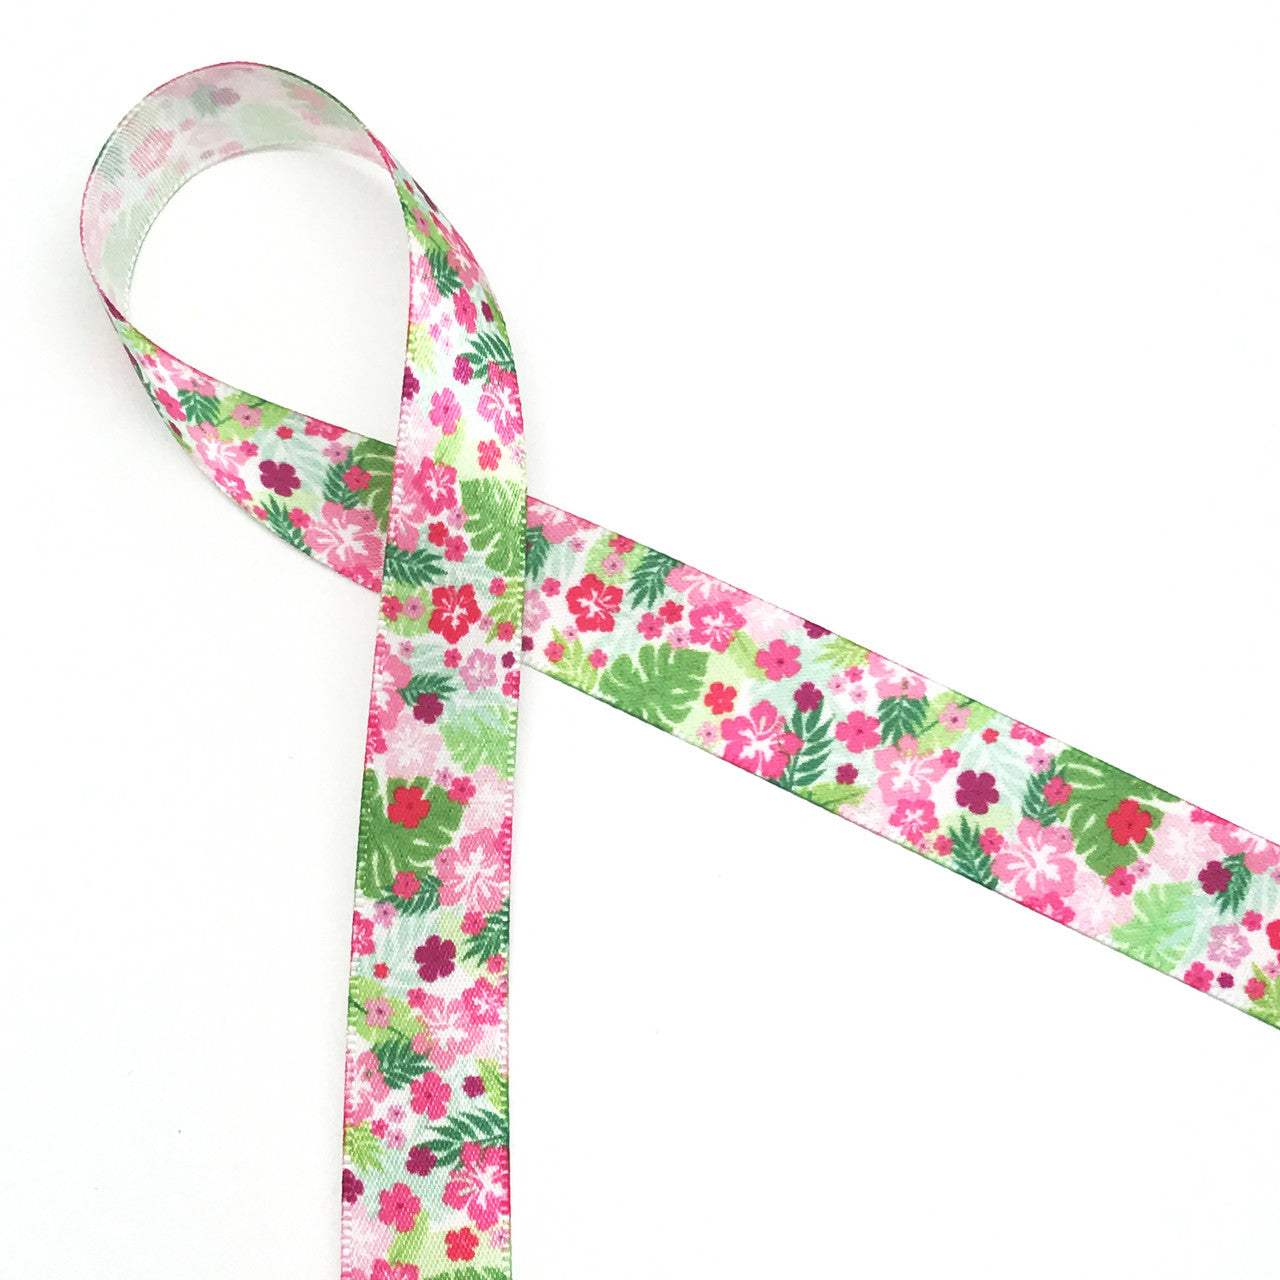 Lily inspired ribbon pink and green floral featuring hot pink flowers and green ferns and palm fronds printed on 5/8' white single face satin  is the perfect ribbon for any Summer party, bridal shower, tea party or Mother's Day brunch. This is an ideal ribbon for party favors, party decor, gift wrap, table decor, cookies, cake pops and desserts. Use this ribbon for Summer crafts, hair bows, head bands, sewing and quilting projects too. All our ribbon is designed and printed in the USA